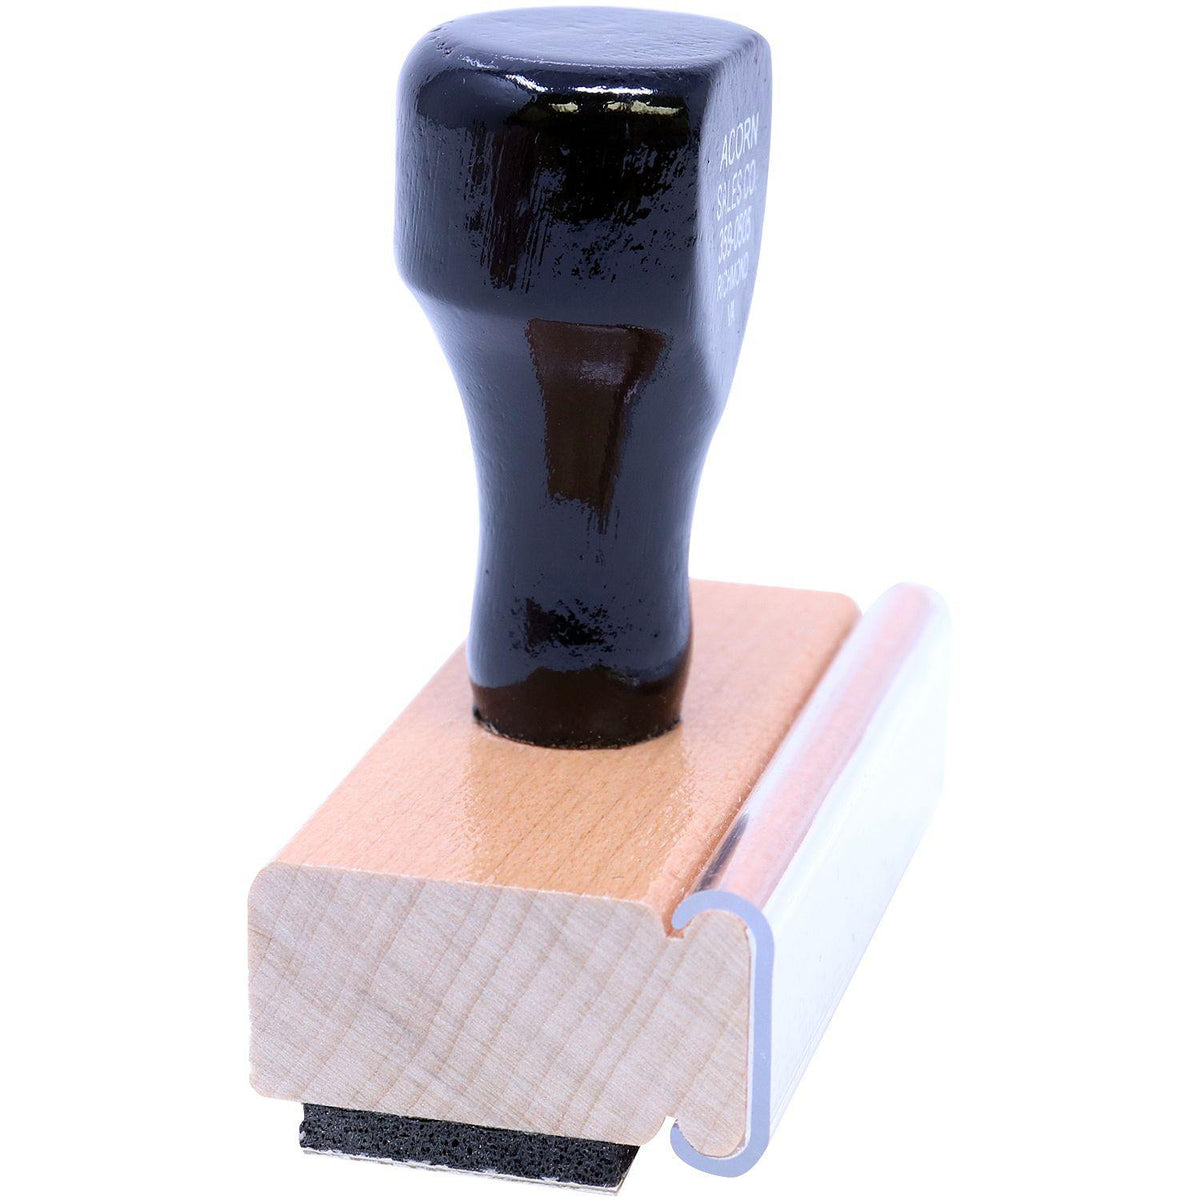 Side View of Entered On Rubber Stamp at an Angle